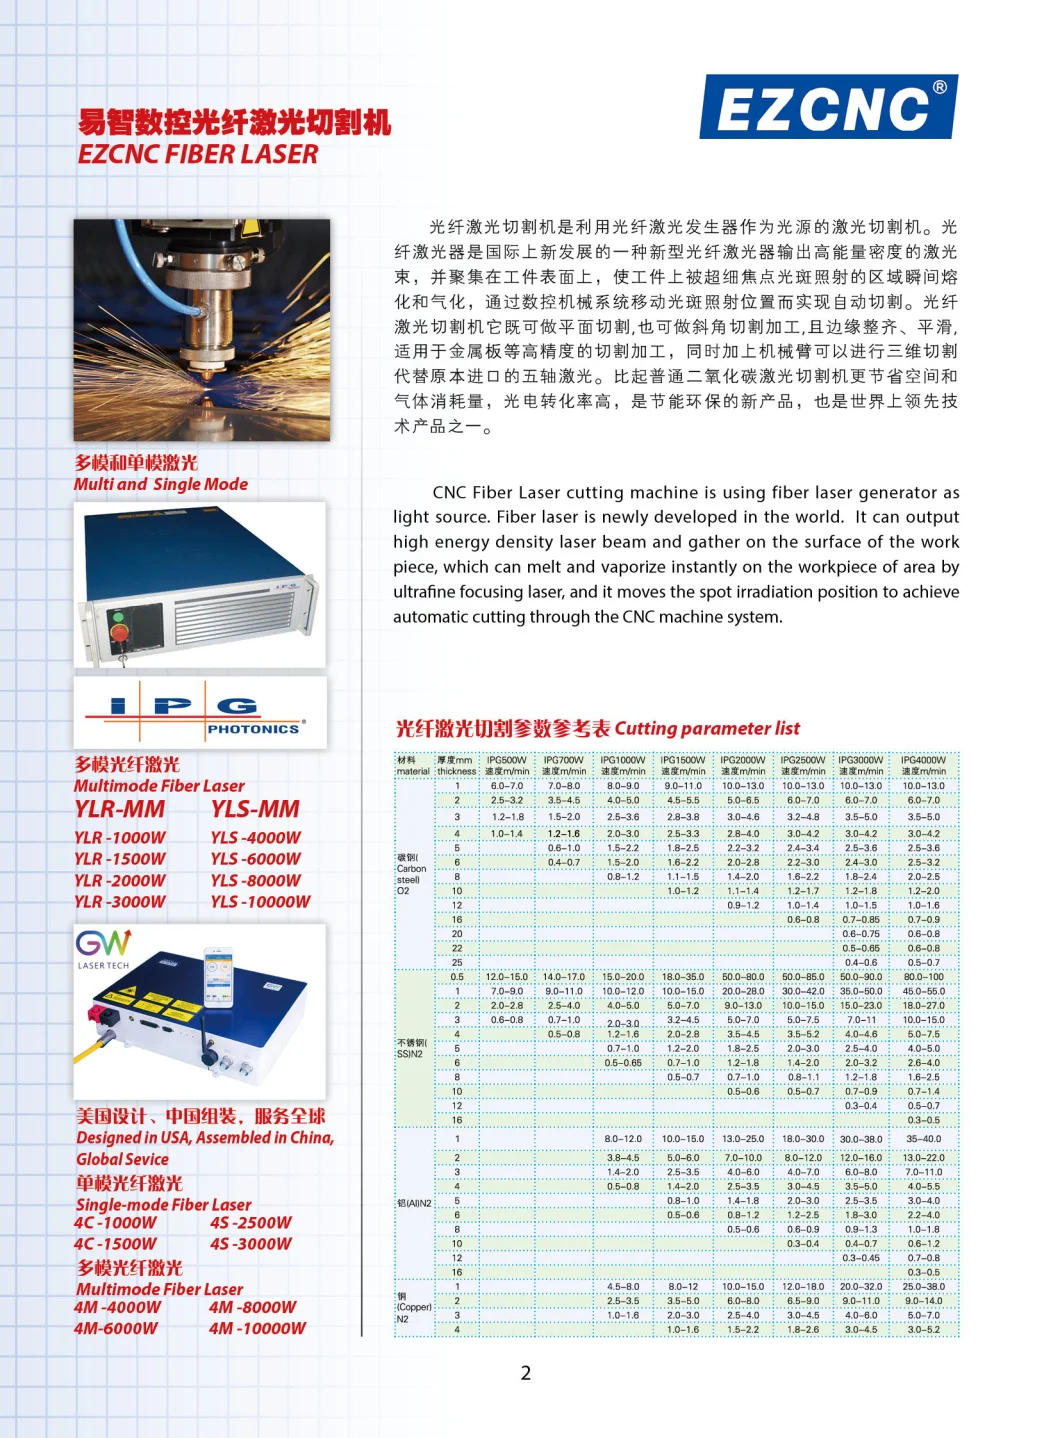 Pipe Tube 2000W Fiber Laser Cutting Machine for Square and Round Steel Tube Cutting Machine